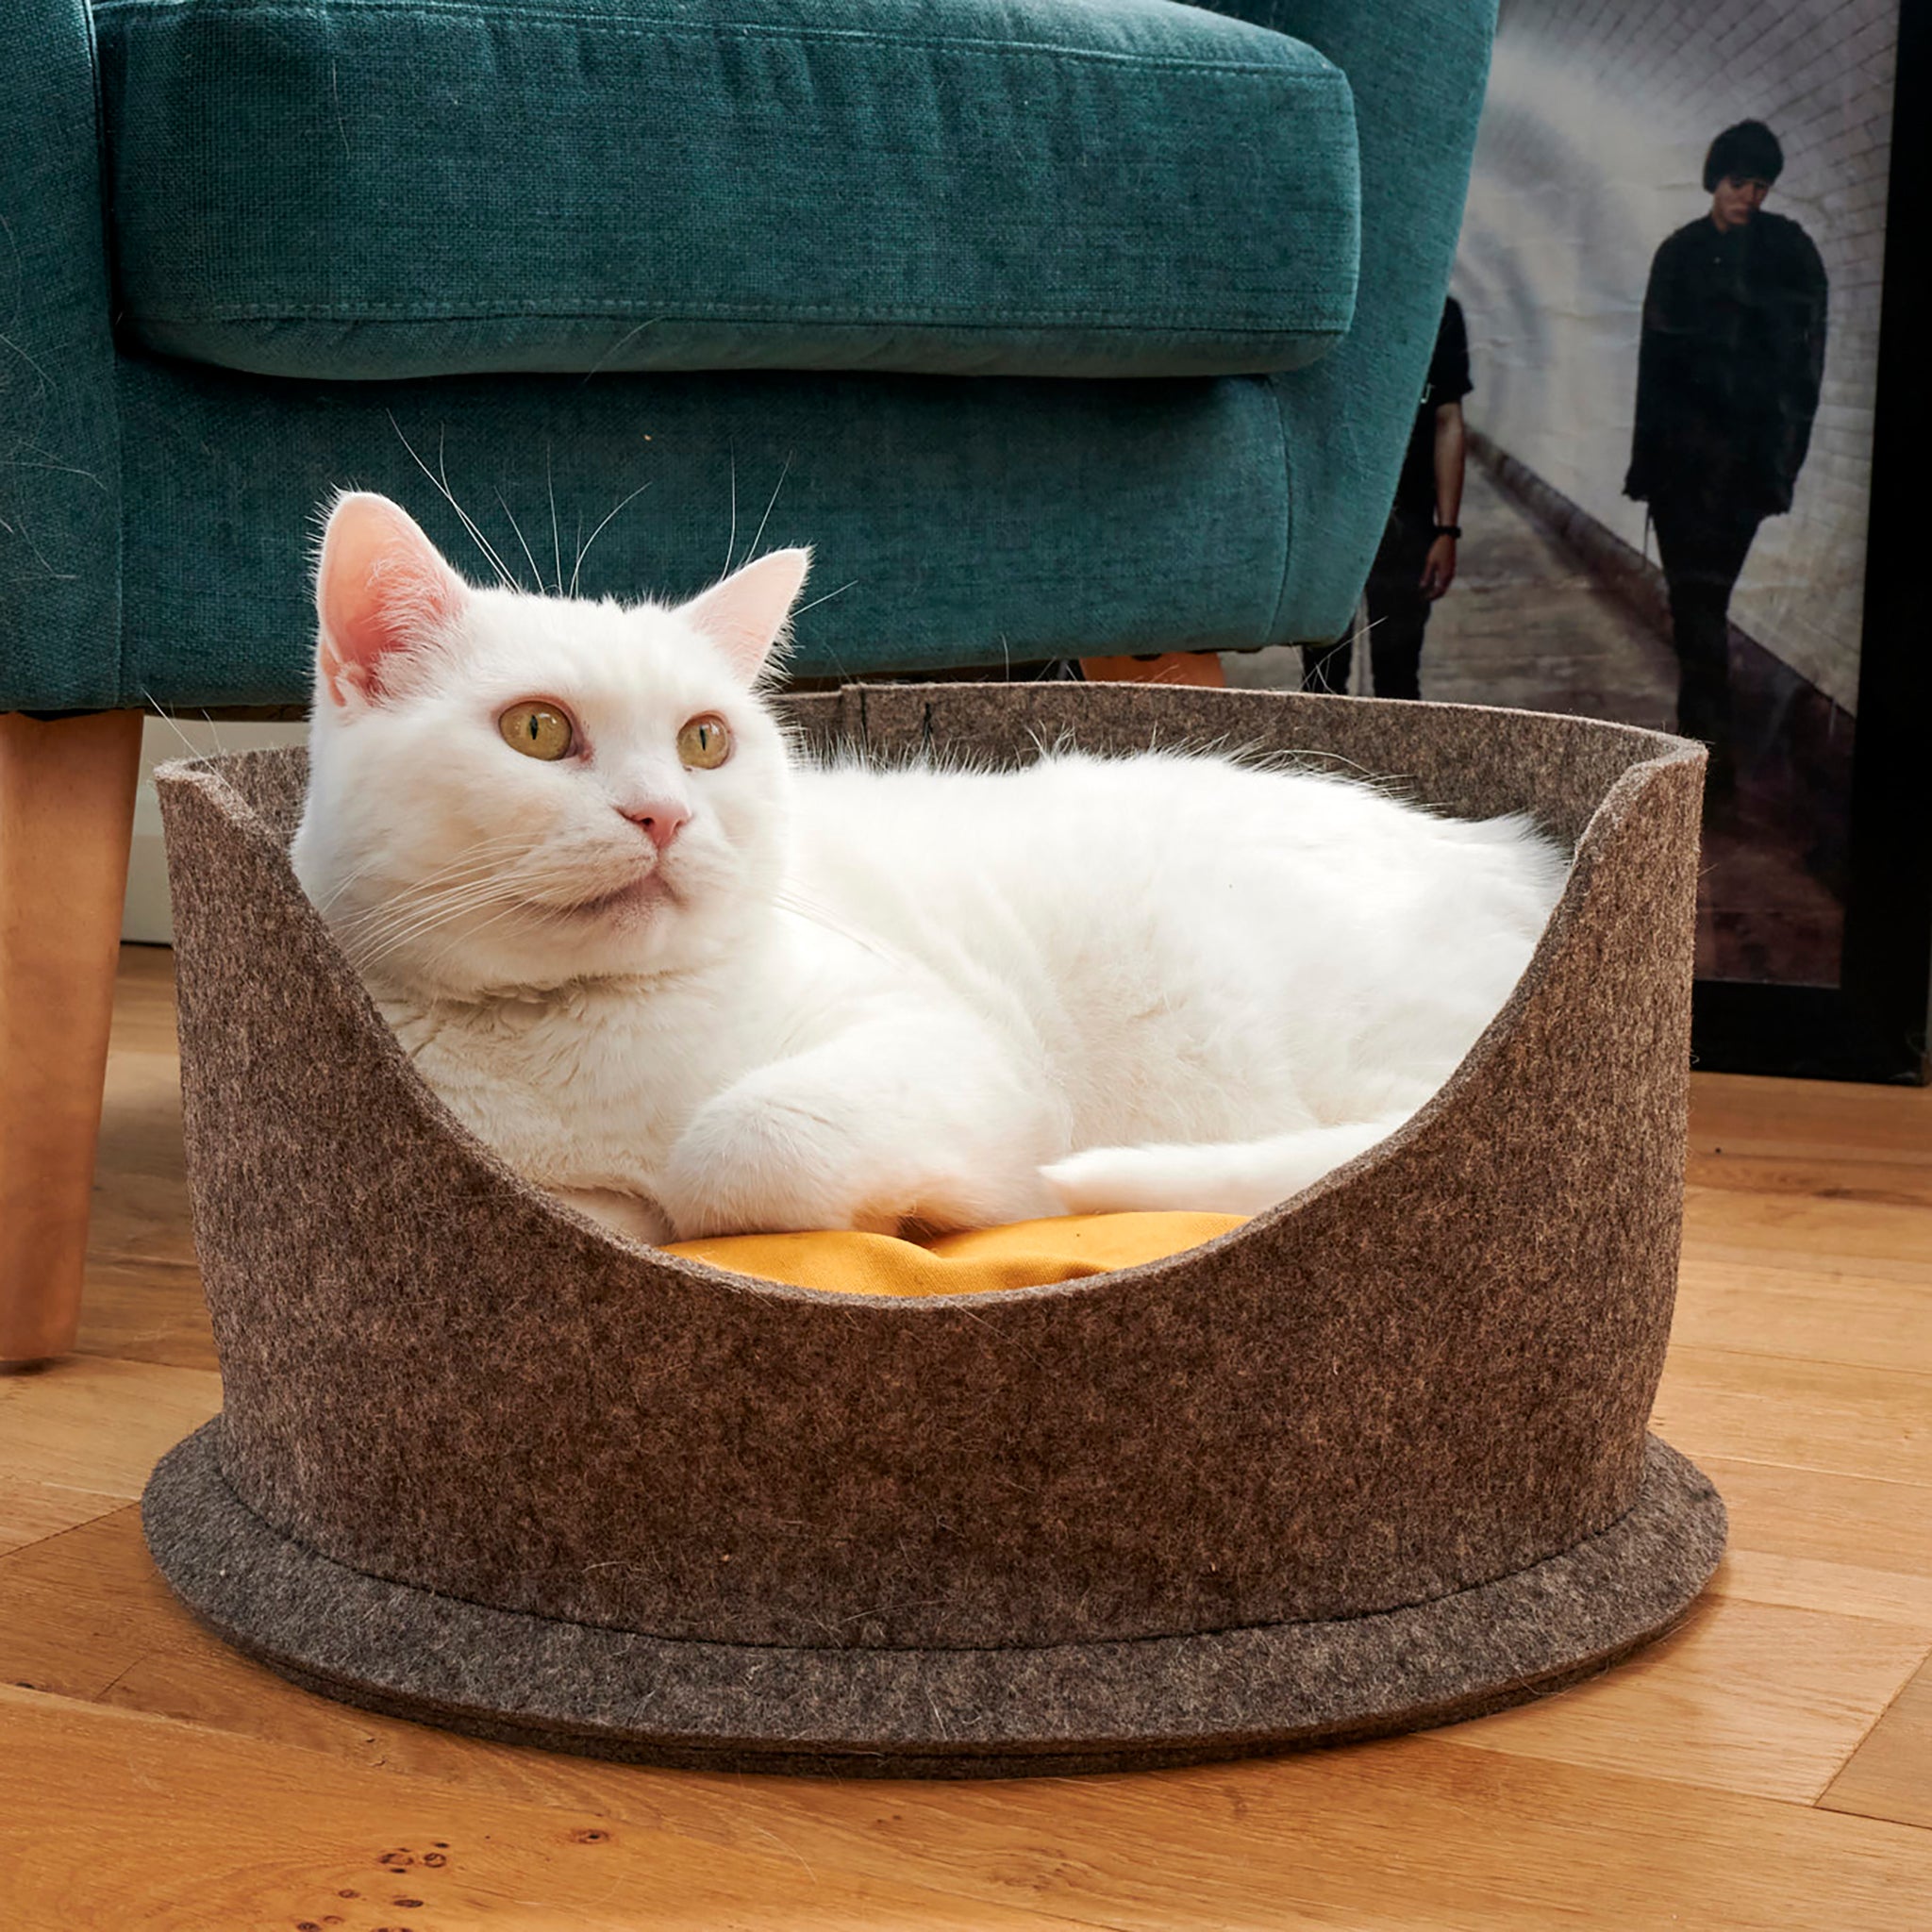 A white cat with yellow eyes sits comfortably inside a Chimney Sheep PetSnug felted wool cat cozy bed. The cat sits upon a wool pet cushion inside the bed and the bed is placed on a wooden floor infront of a green chair.